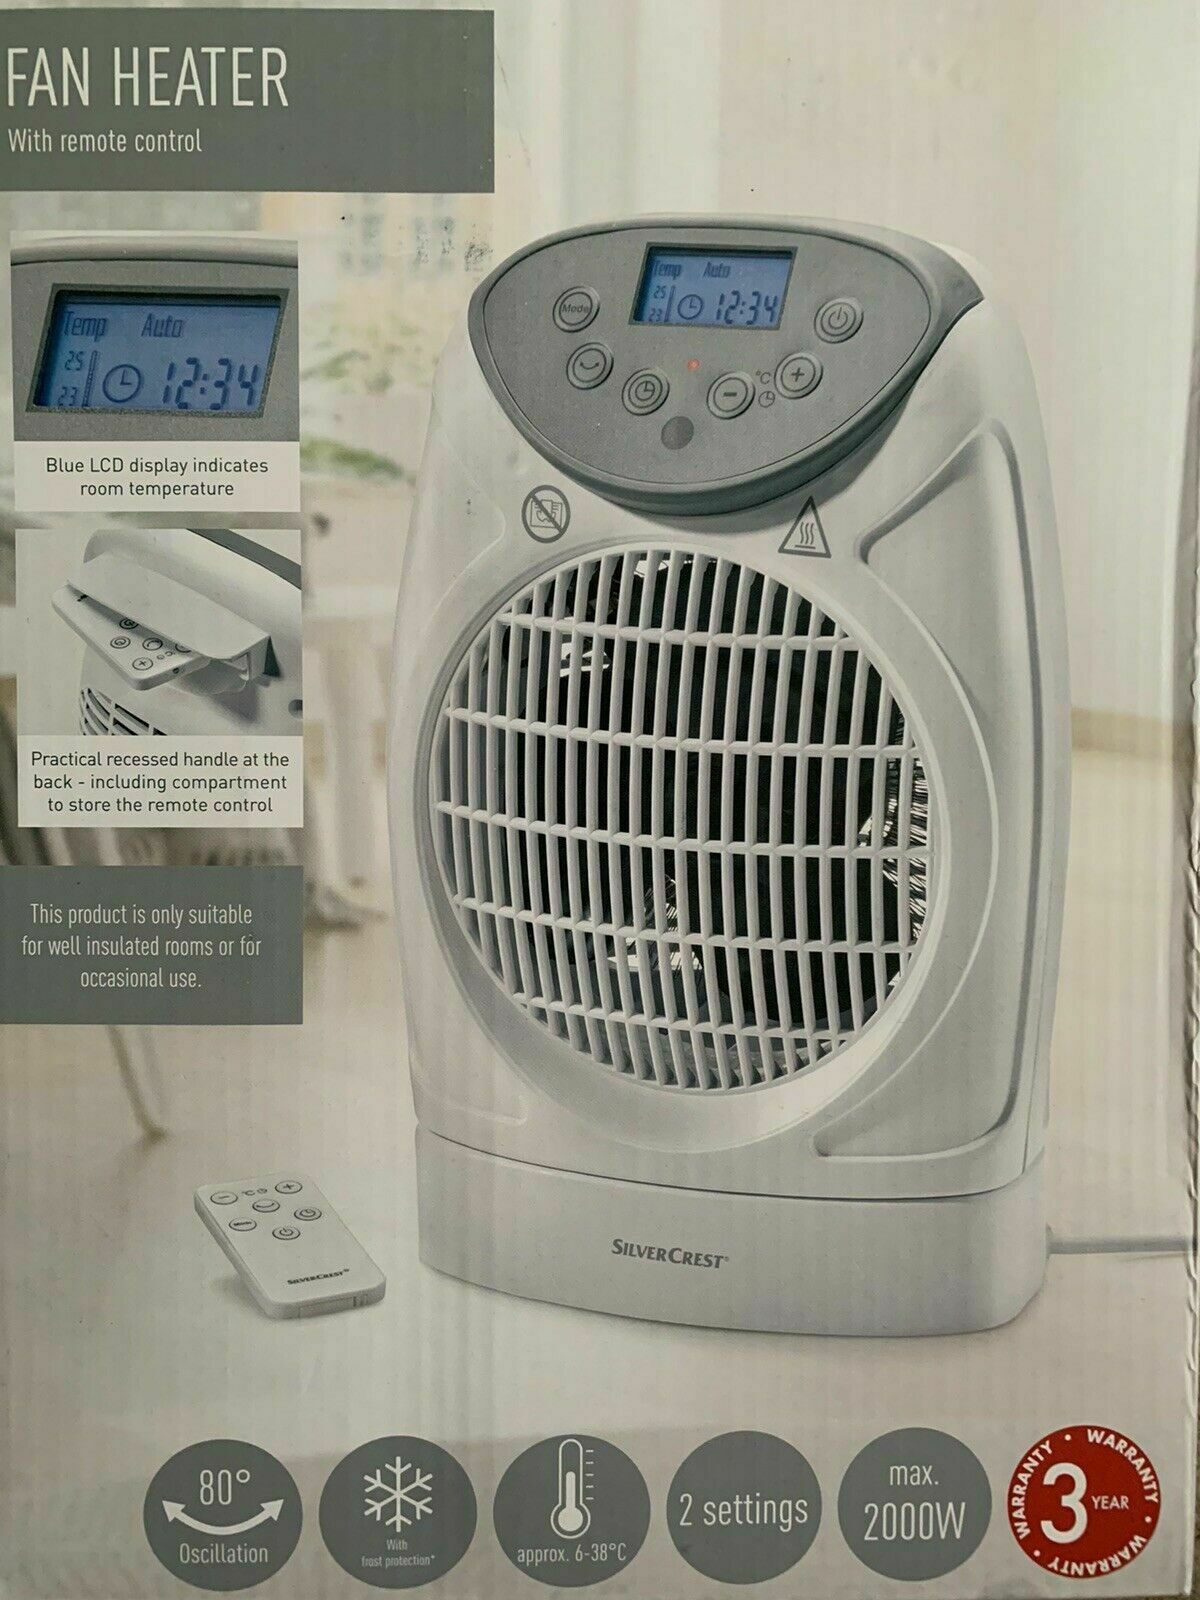 Silvercrest Oscillating Fan Heater 10002000 W With Remote Control Made Germany pertaining to sizing 1200 X 1600